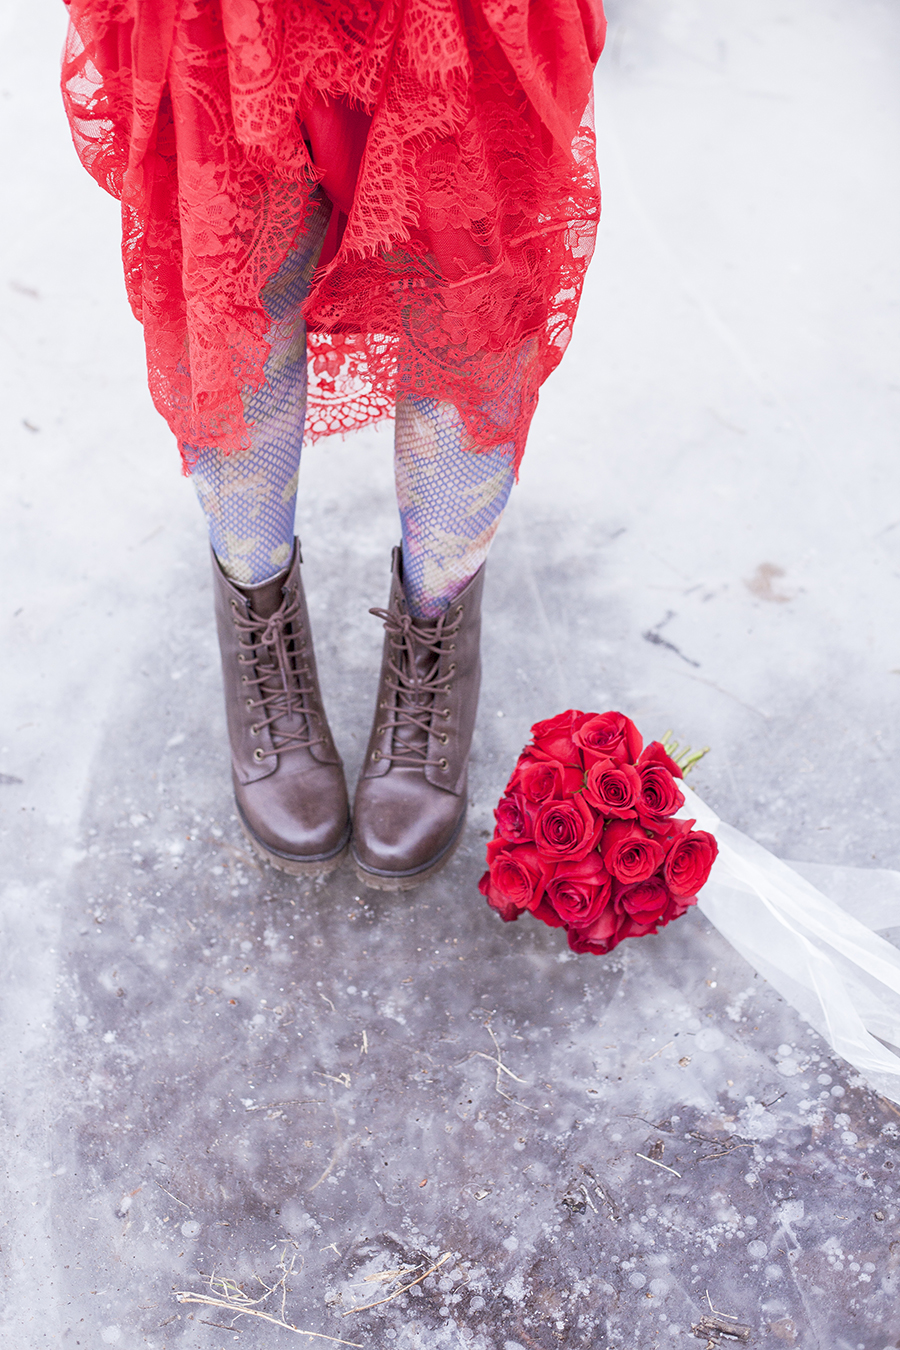 Banggood red lace mermaid dress, Urban Outfitters floral lace tights, Steve Madden boots, wedding bouquet of red roses.